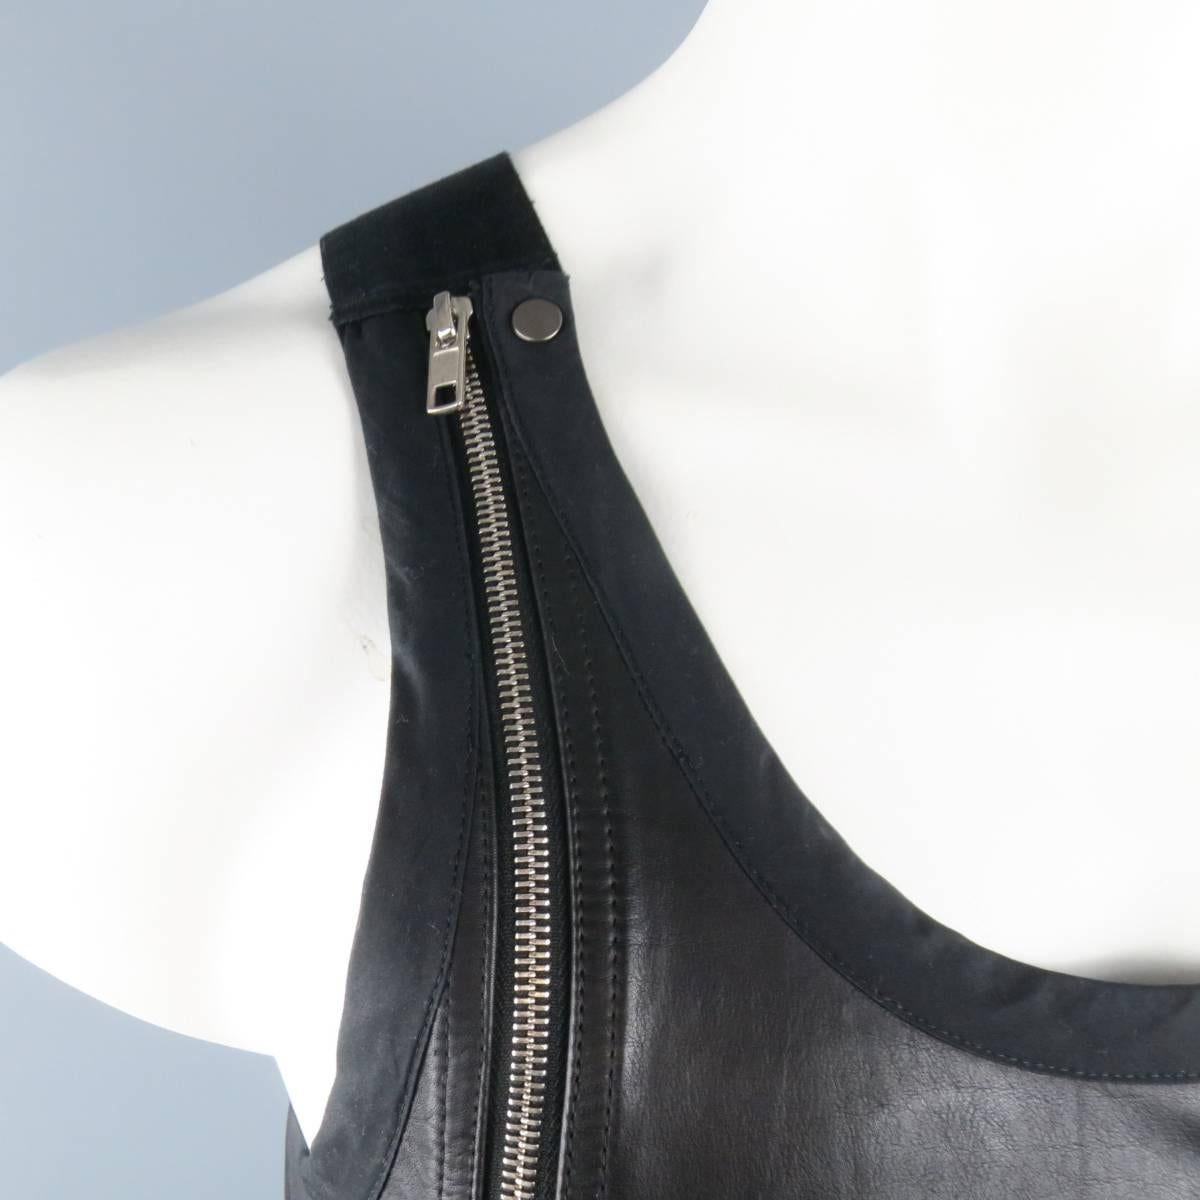 RICK OWENS tank top vest from the Spring Summer 2014 